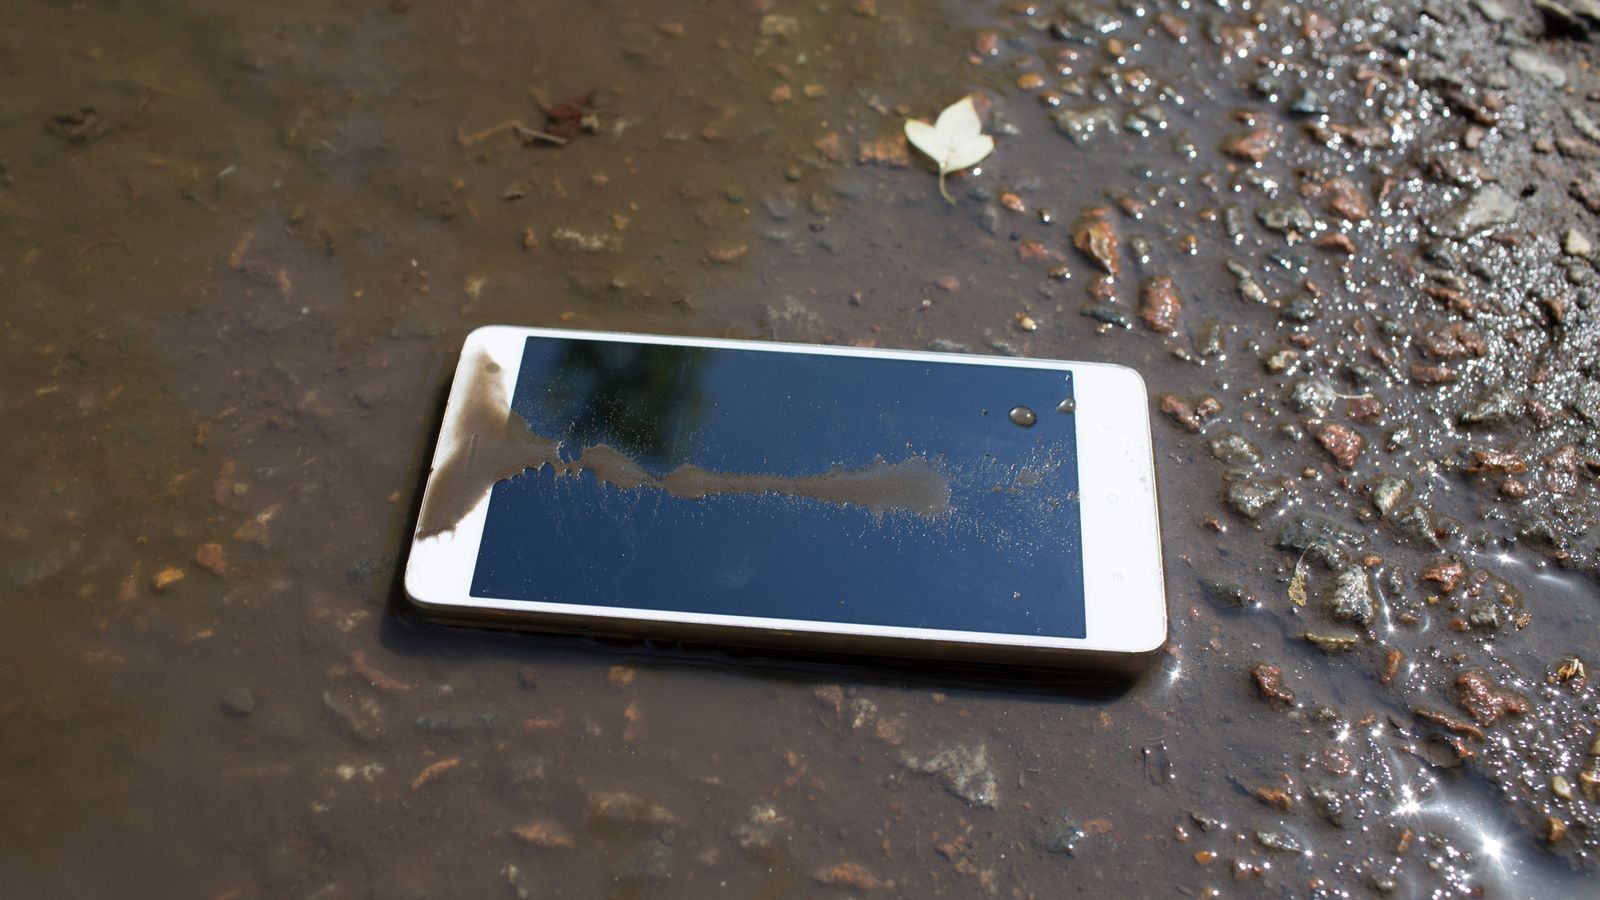 Two million litres of water drained from reservoir in search for phone dropped by Indian official taking selfie